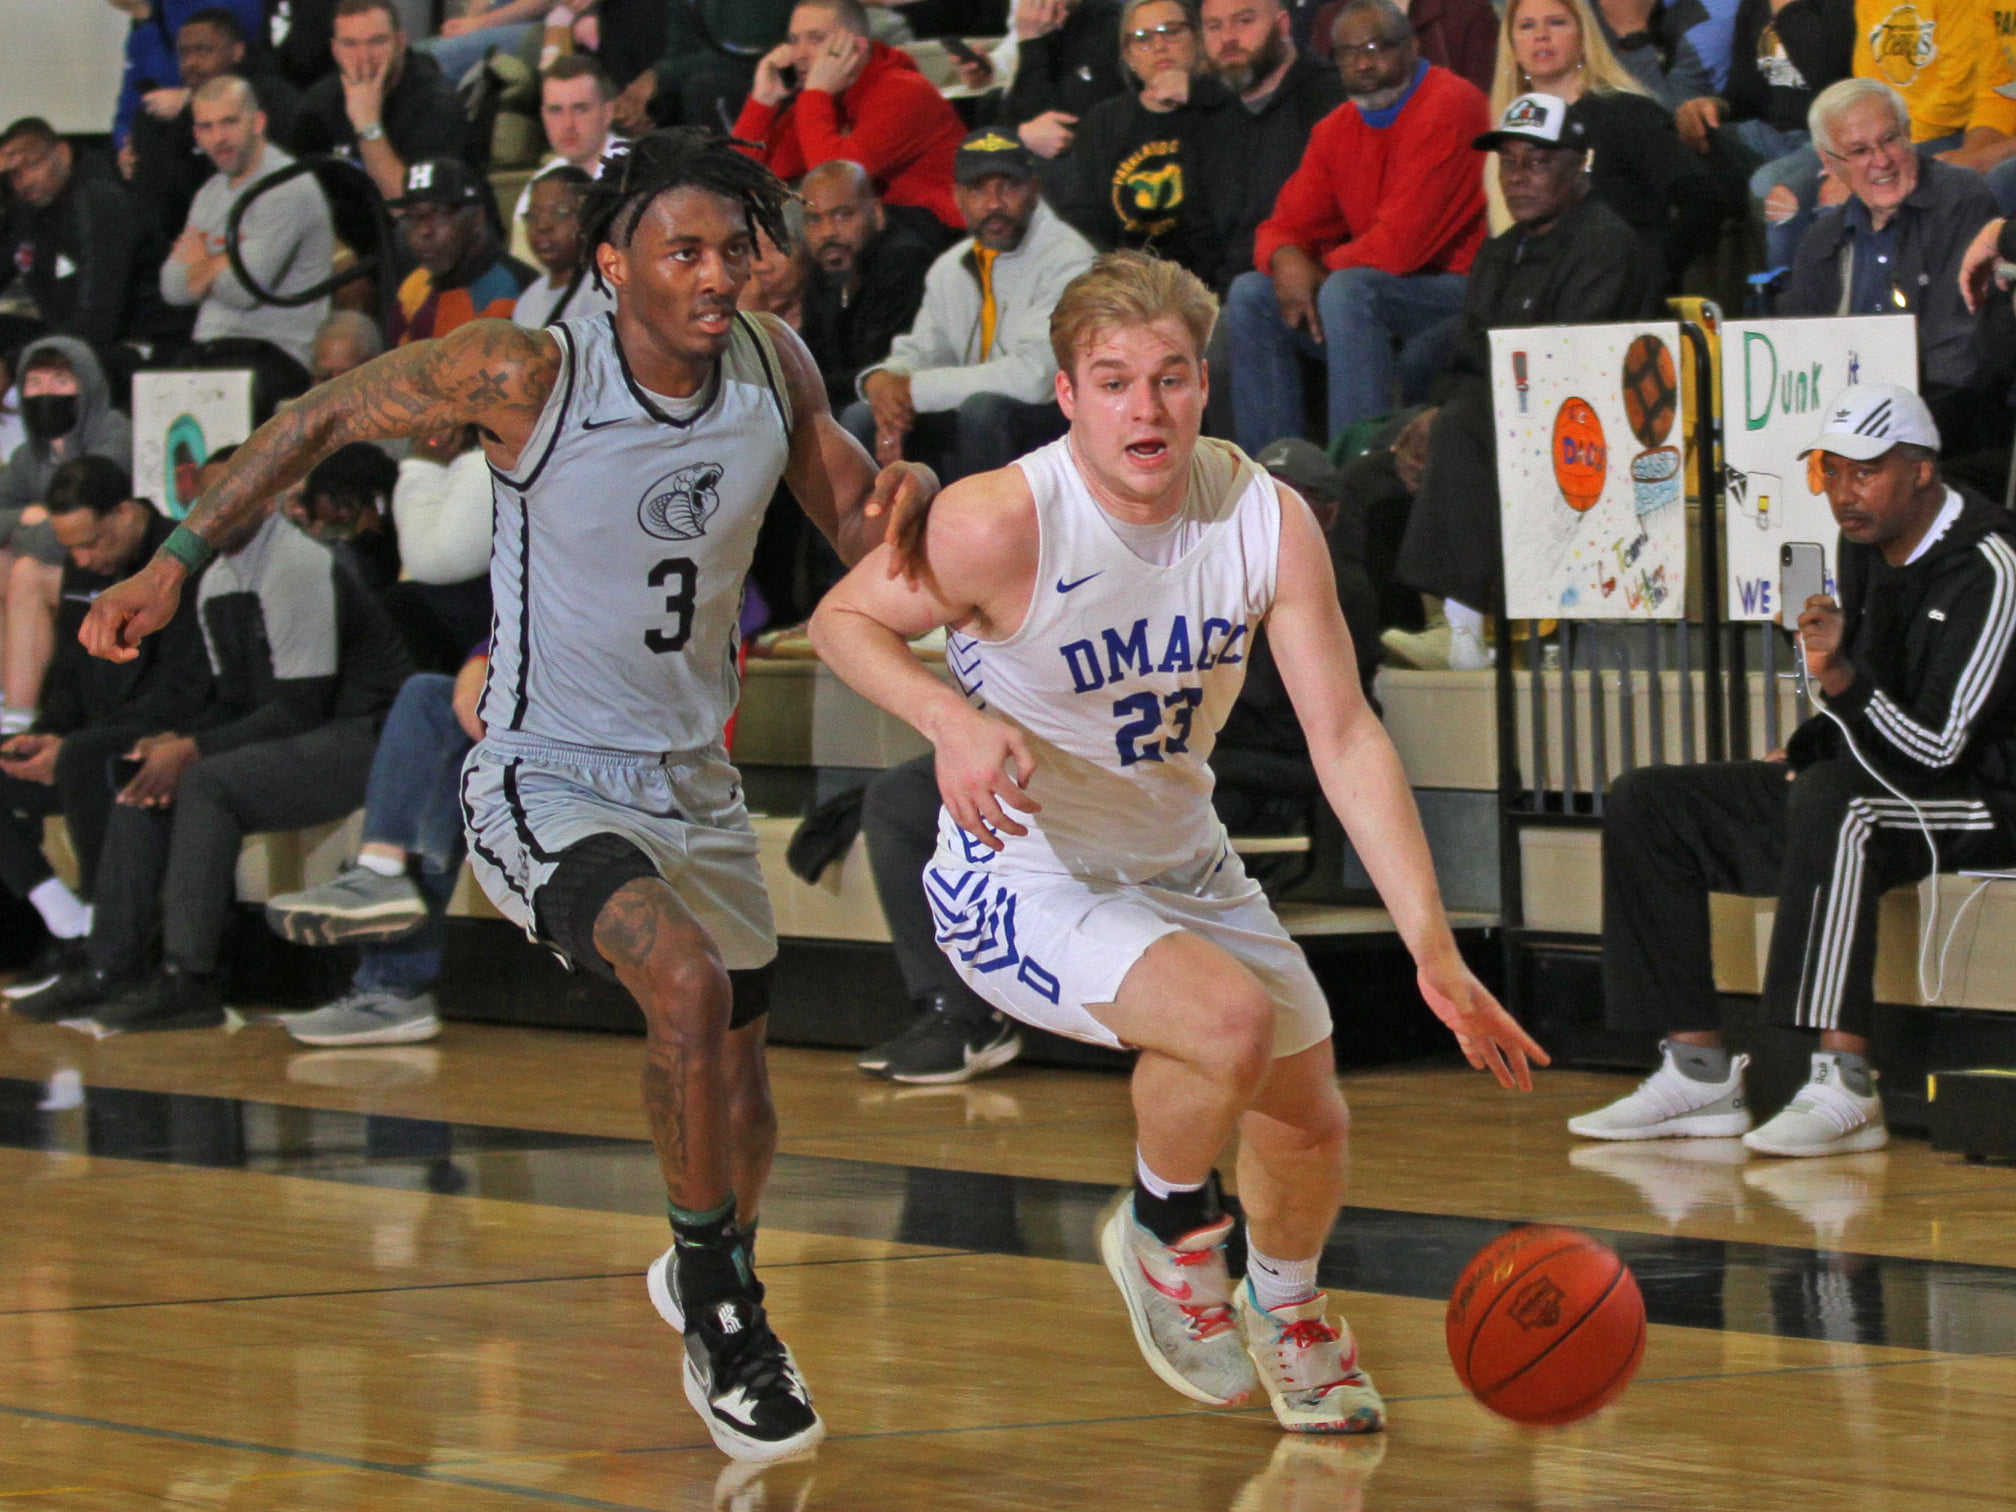 DMACC men's basketball team opens title defense with 76-59 win